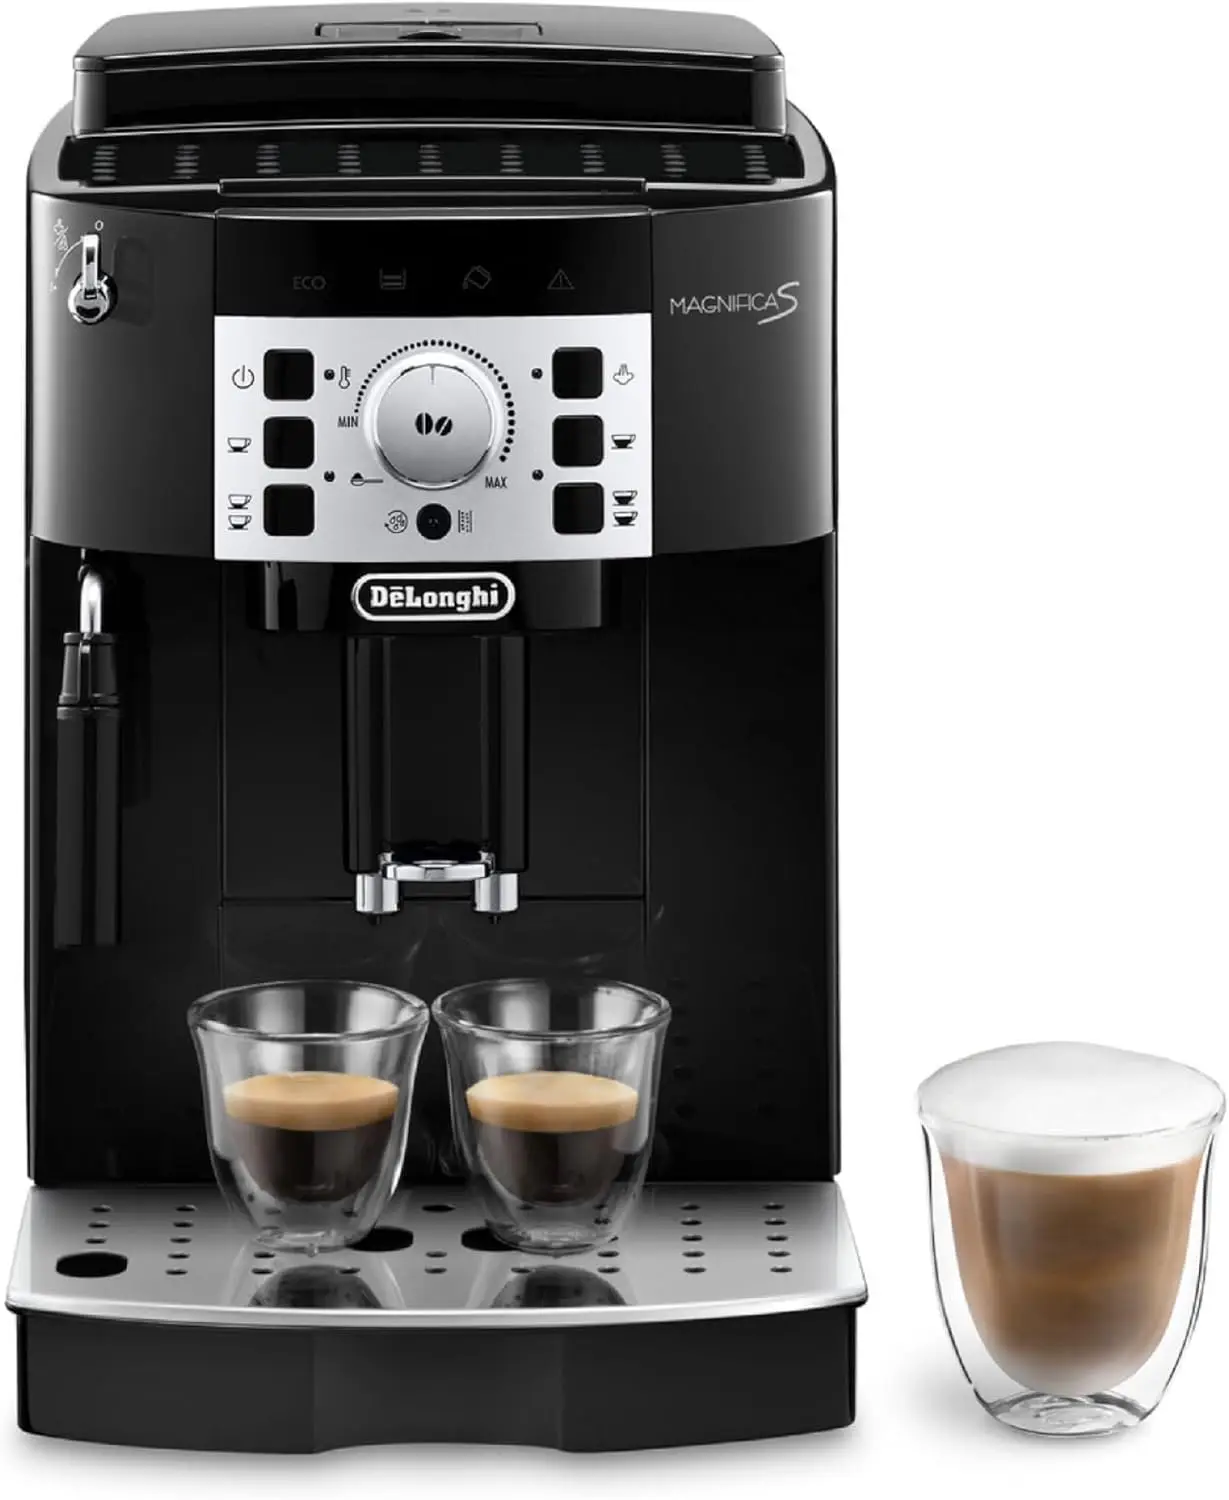 

De'Longhi Magnifica S ECAM22.110.B, Coffee Maker with with Milk Frother